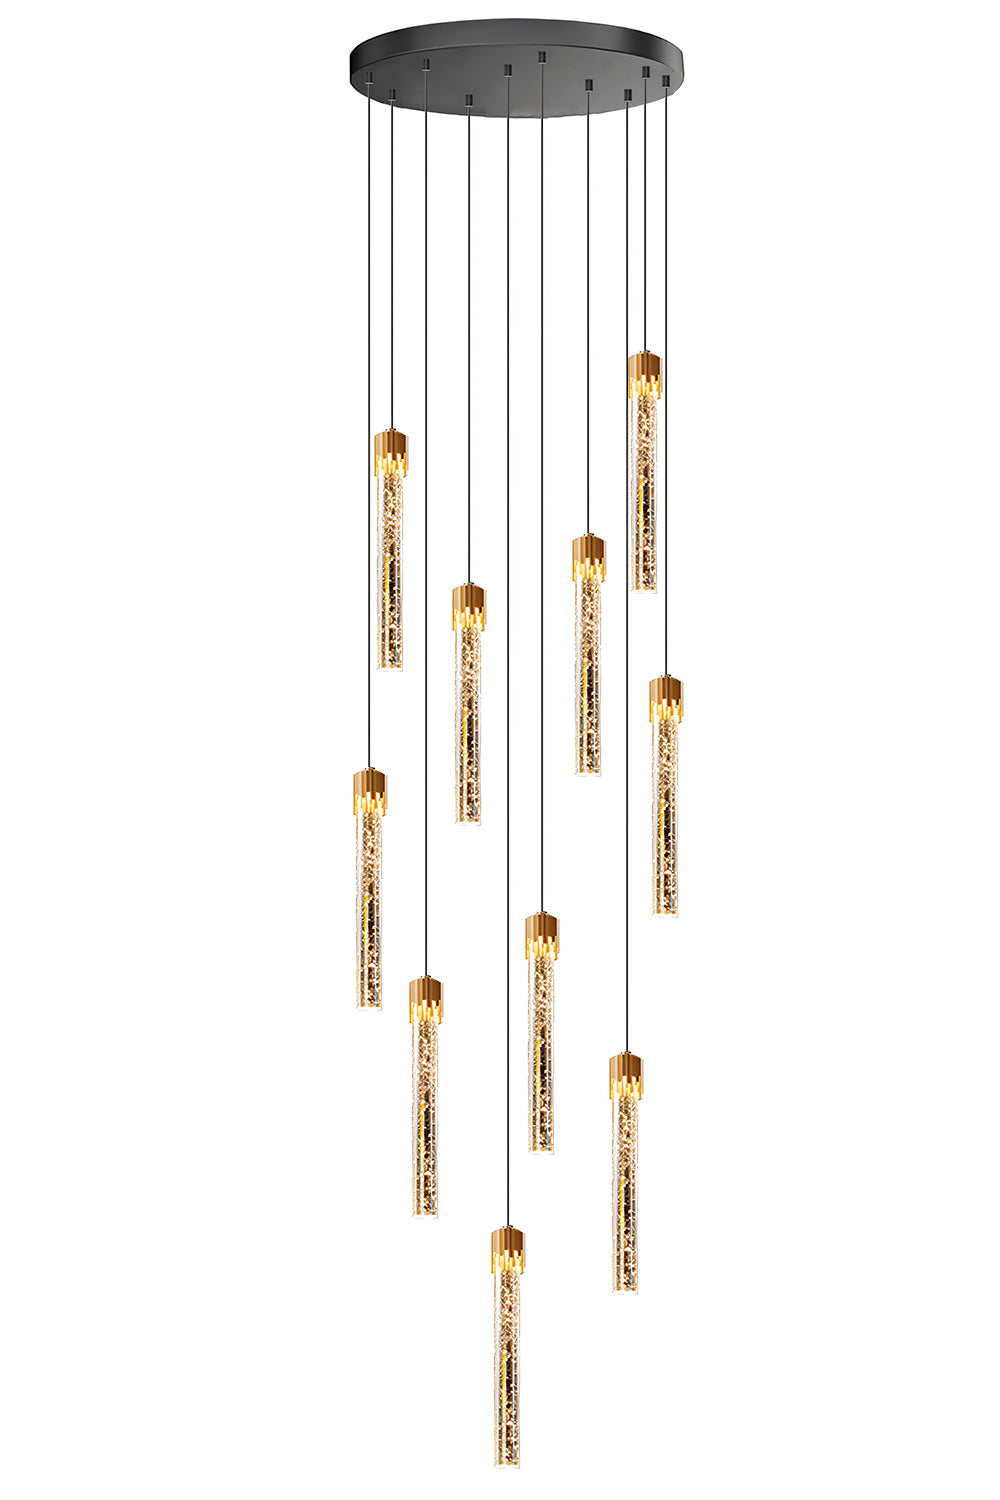 Sleek gold bubble crystal pendant light with 10 lights hanging from ceiling.